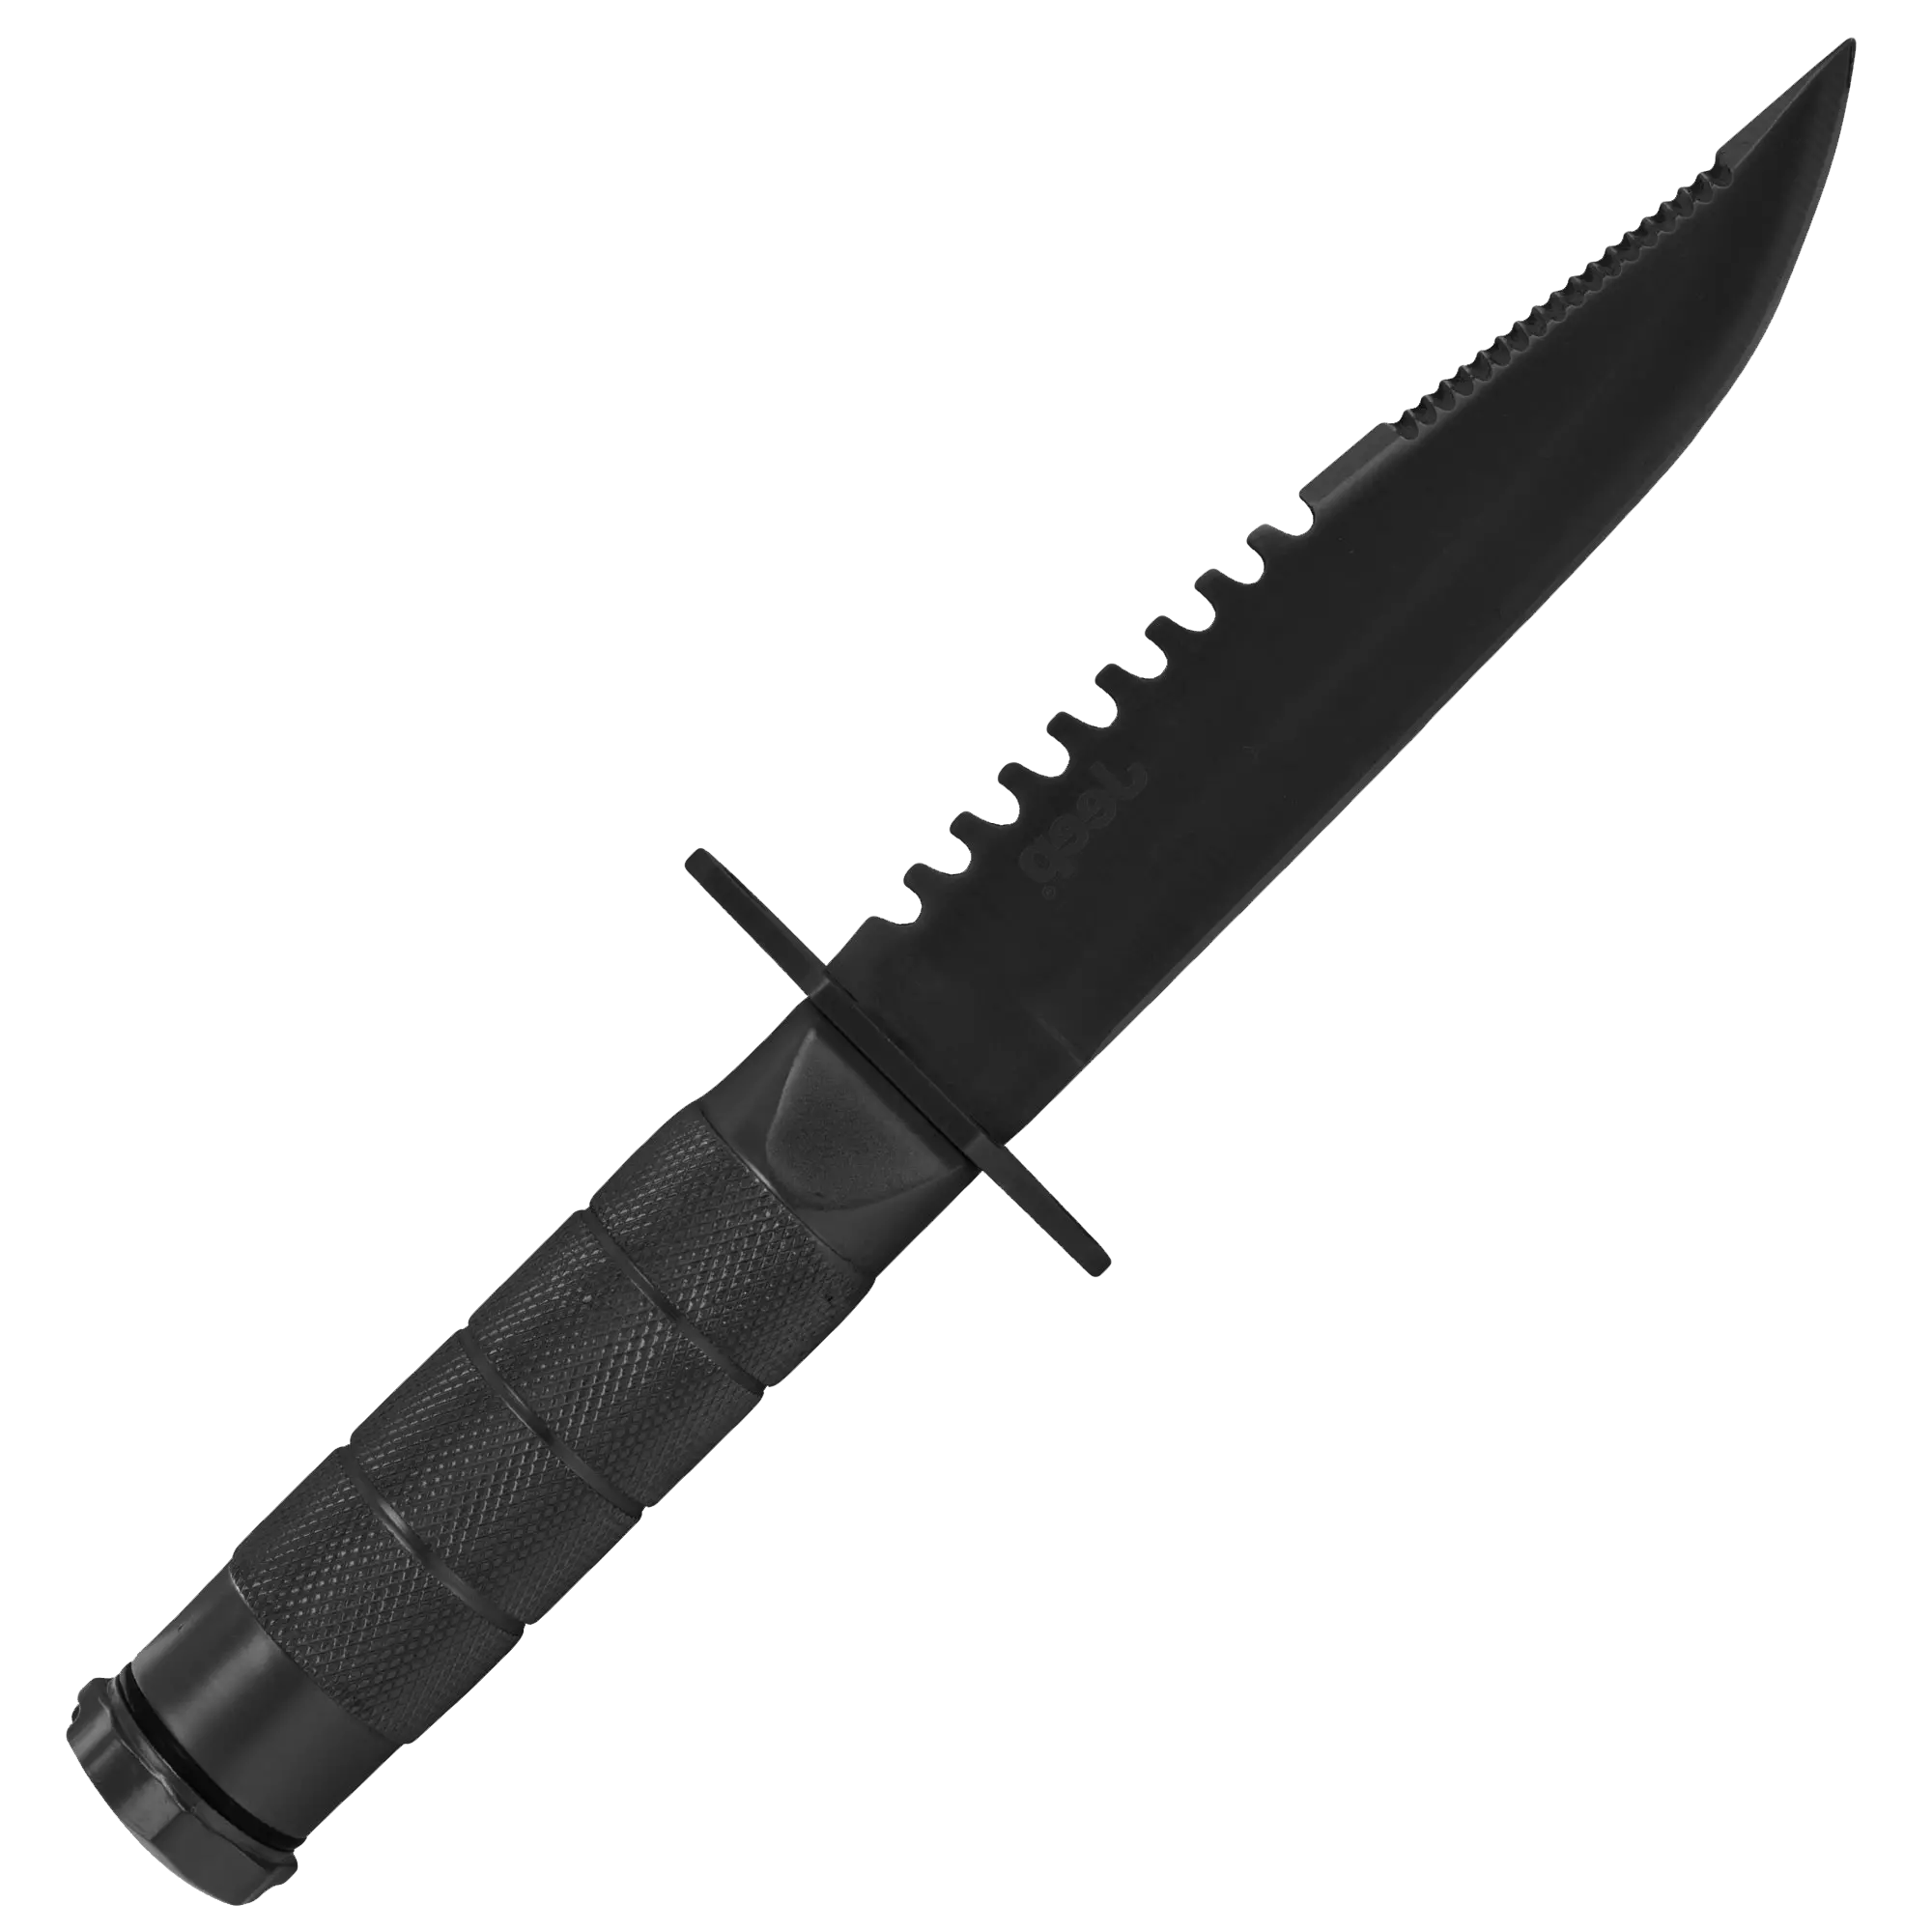 Crab Knife Png